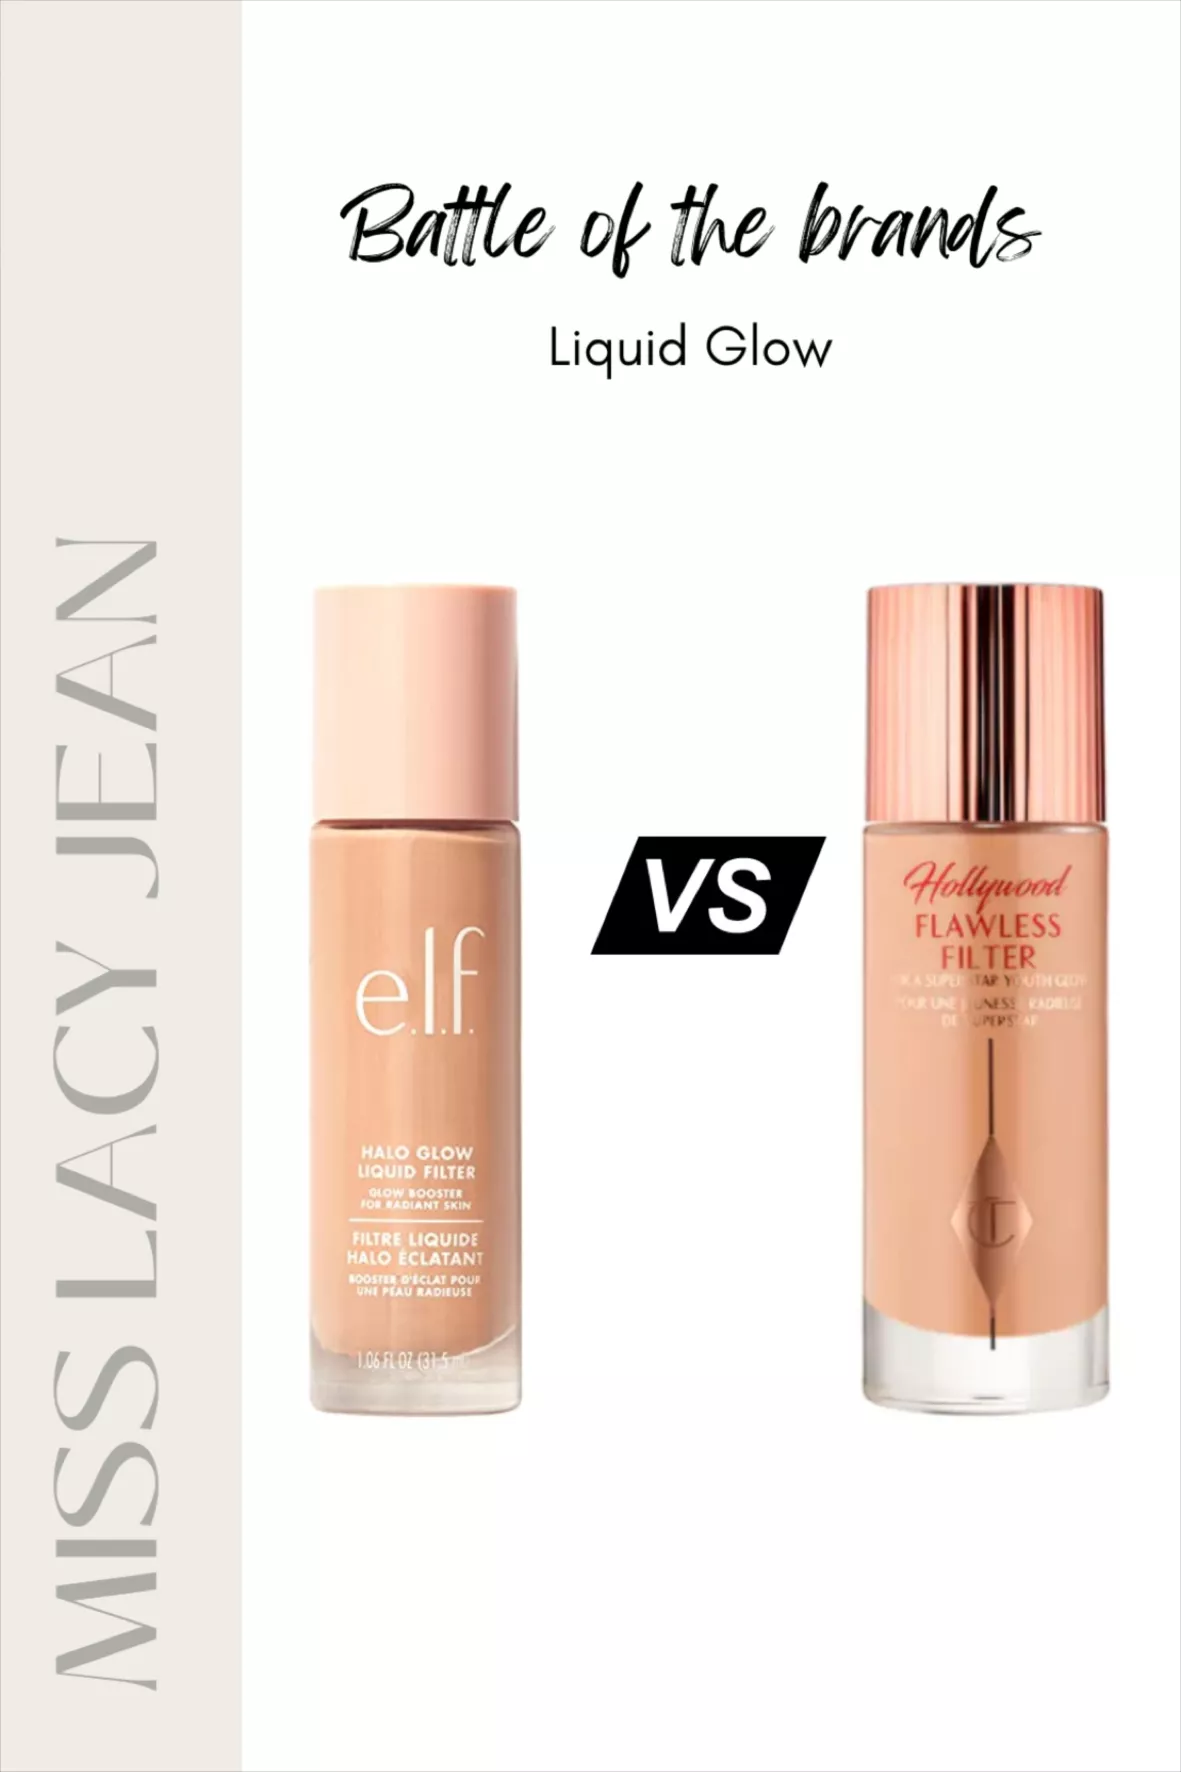 Hollywood Flawless Filter: Glow Booster